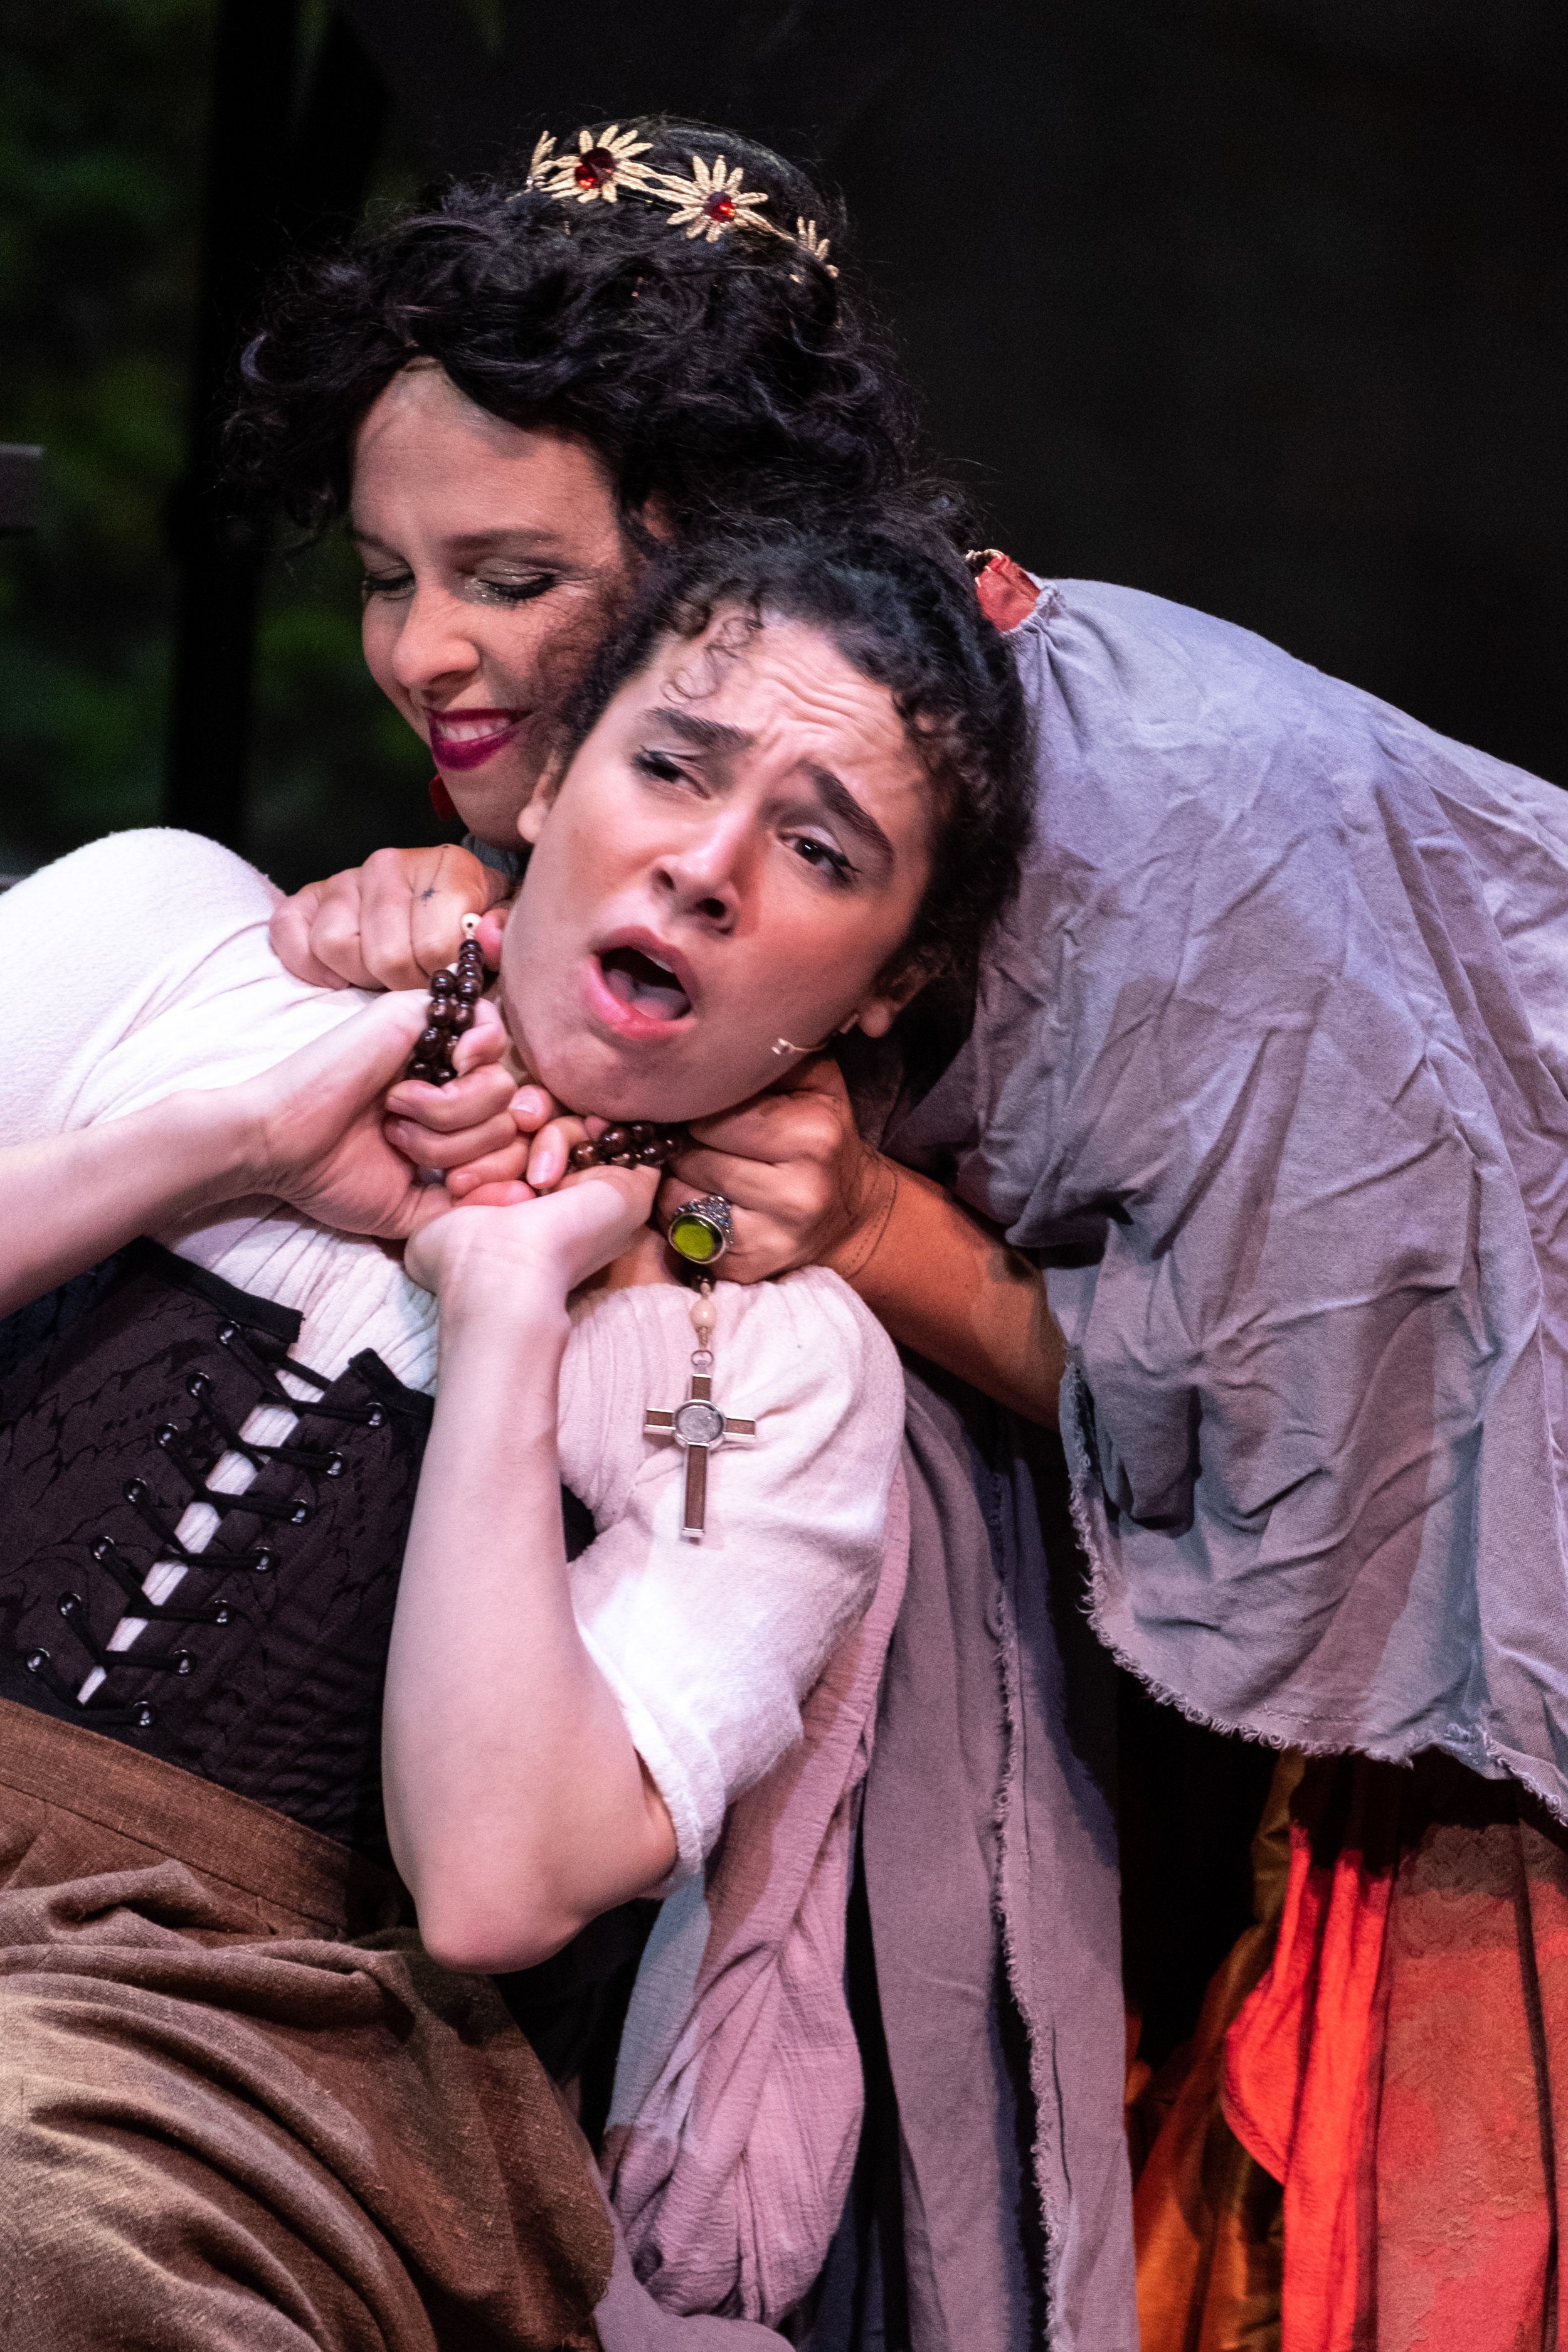  Megan Winberg as Milady de Winter attempts to strangle Saba Asgari, playing Sabine, on stage at the Santa Monica College Theater Department Main Stage on the Main Campus in Santa Monica, Calif. during the opening weekend of Ken Ludwig's The Three Mu